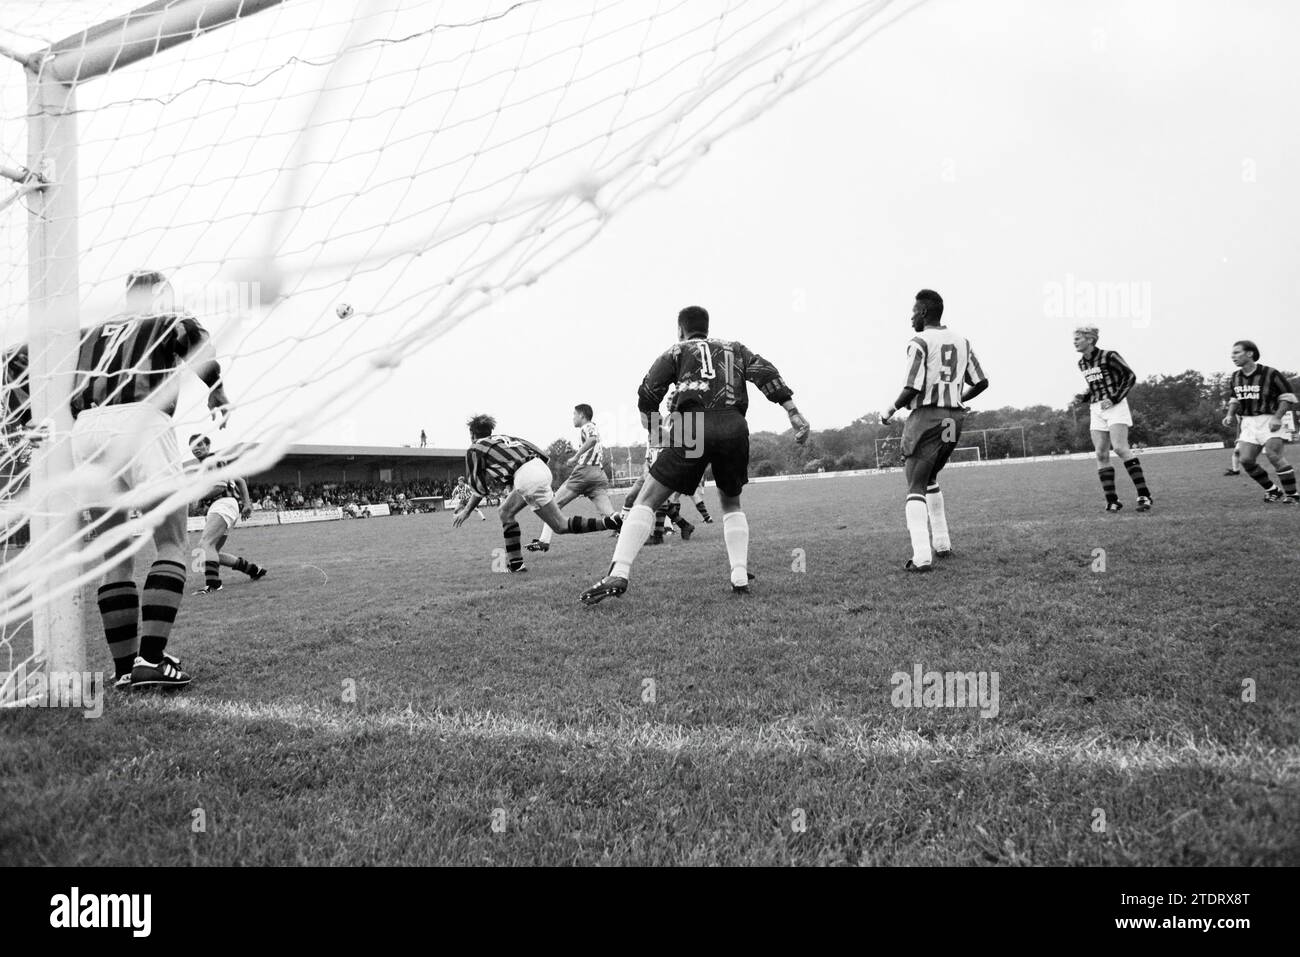 Football, RCH - Willem II, 19-09-1992, Whizgle News from the Past, Tailored for the Future. Explore historical narratives, Dutch The Netherlands agency image with a modern perspective, bridging the gap between yesterday's events and tomorrow's insights. A timeless journey shaping the stories that shape our future Stock Photo